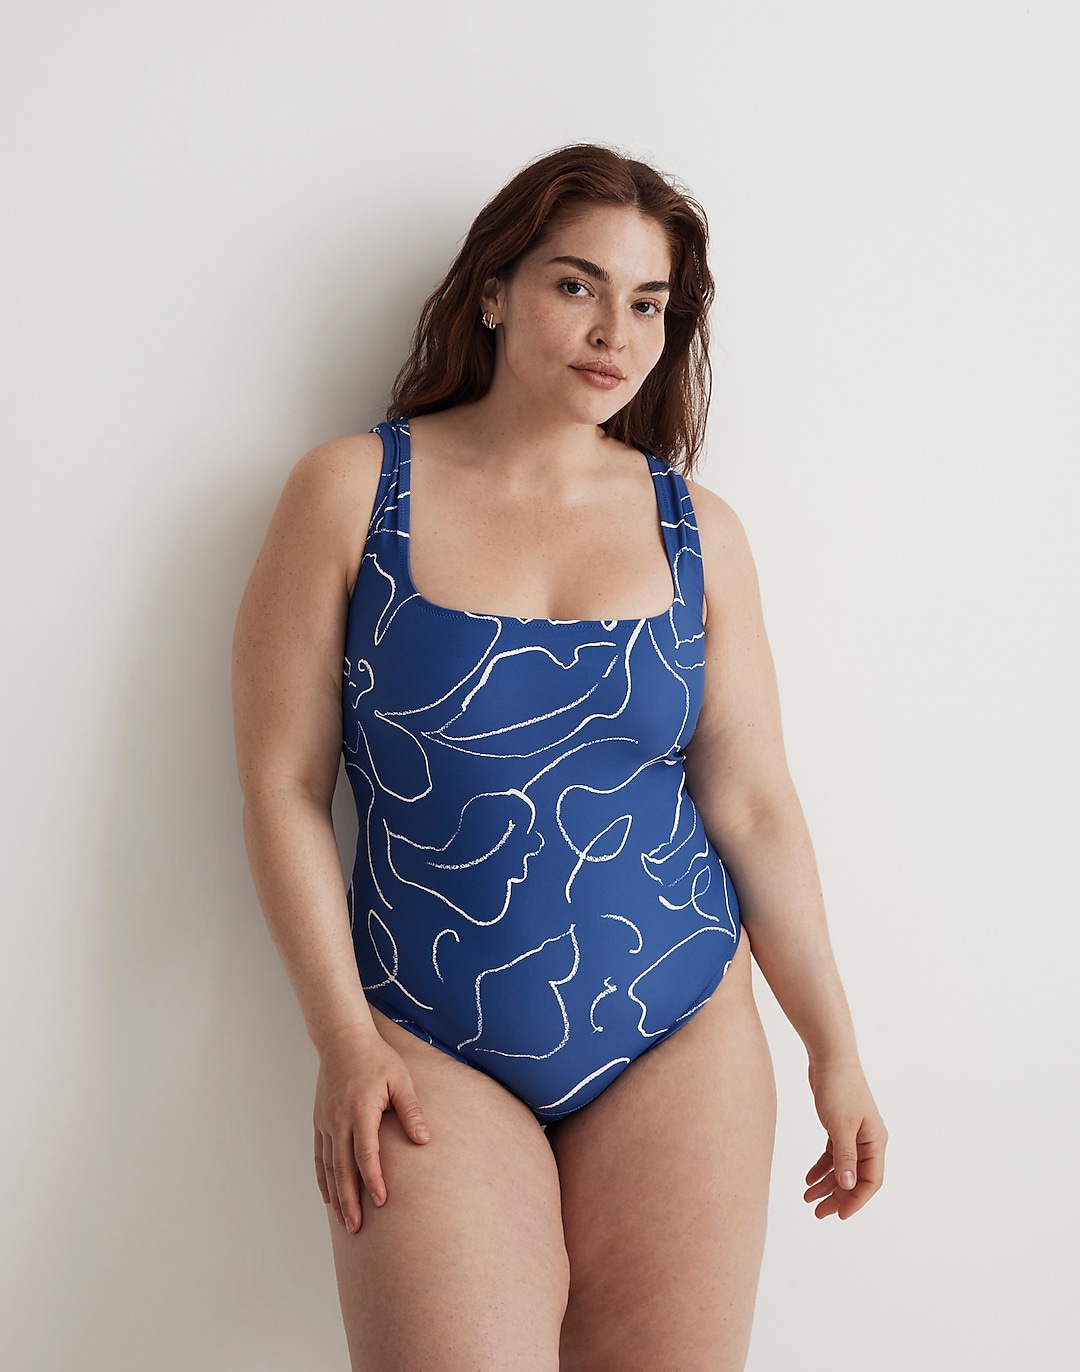 Trans Woman Bathing Suit Shopping, 45% OFF